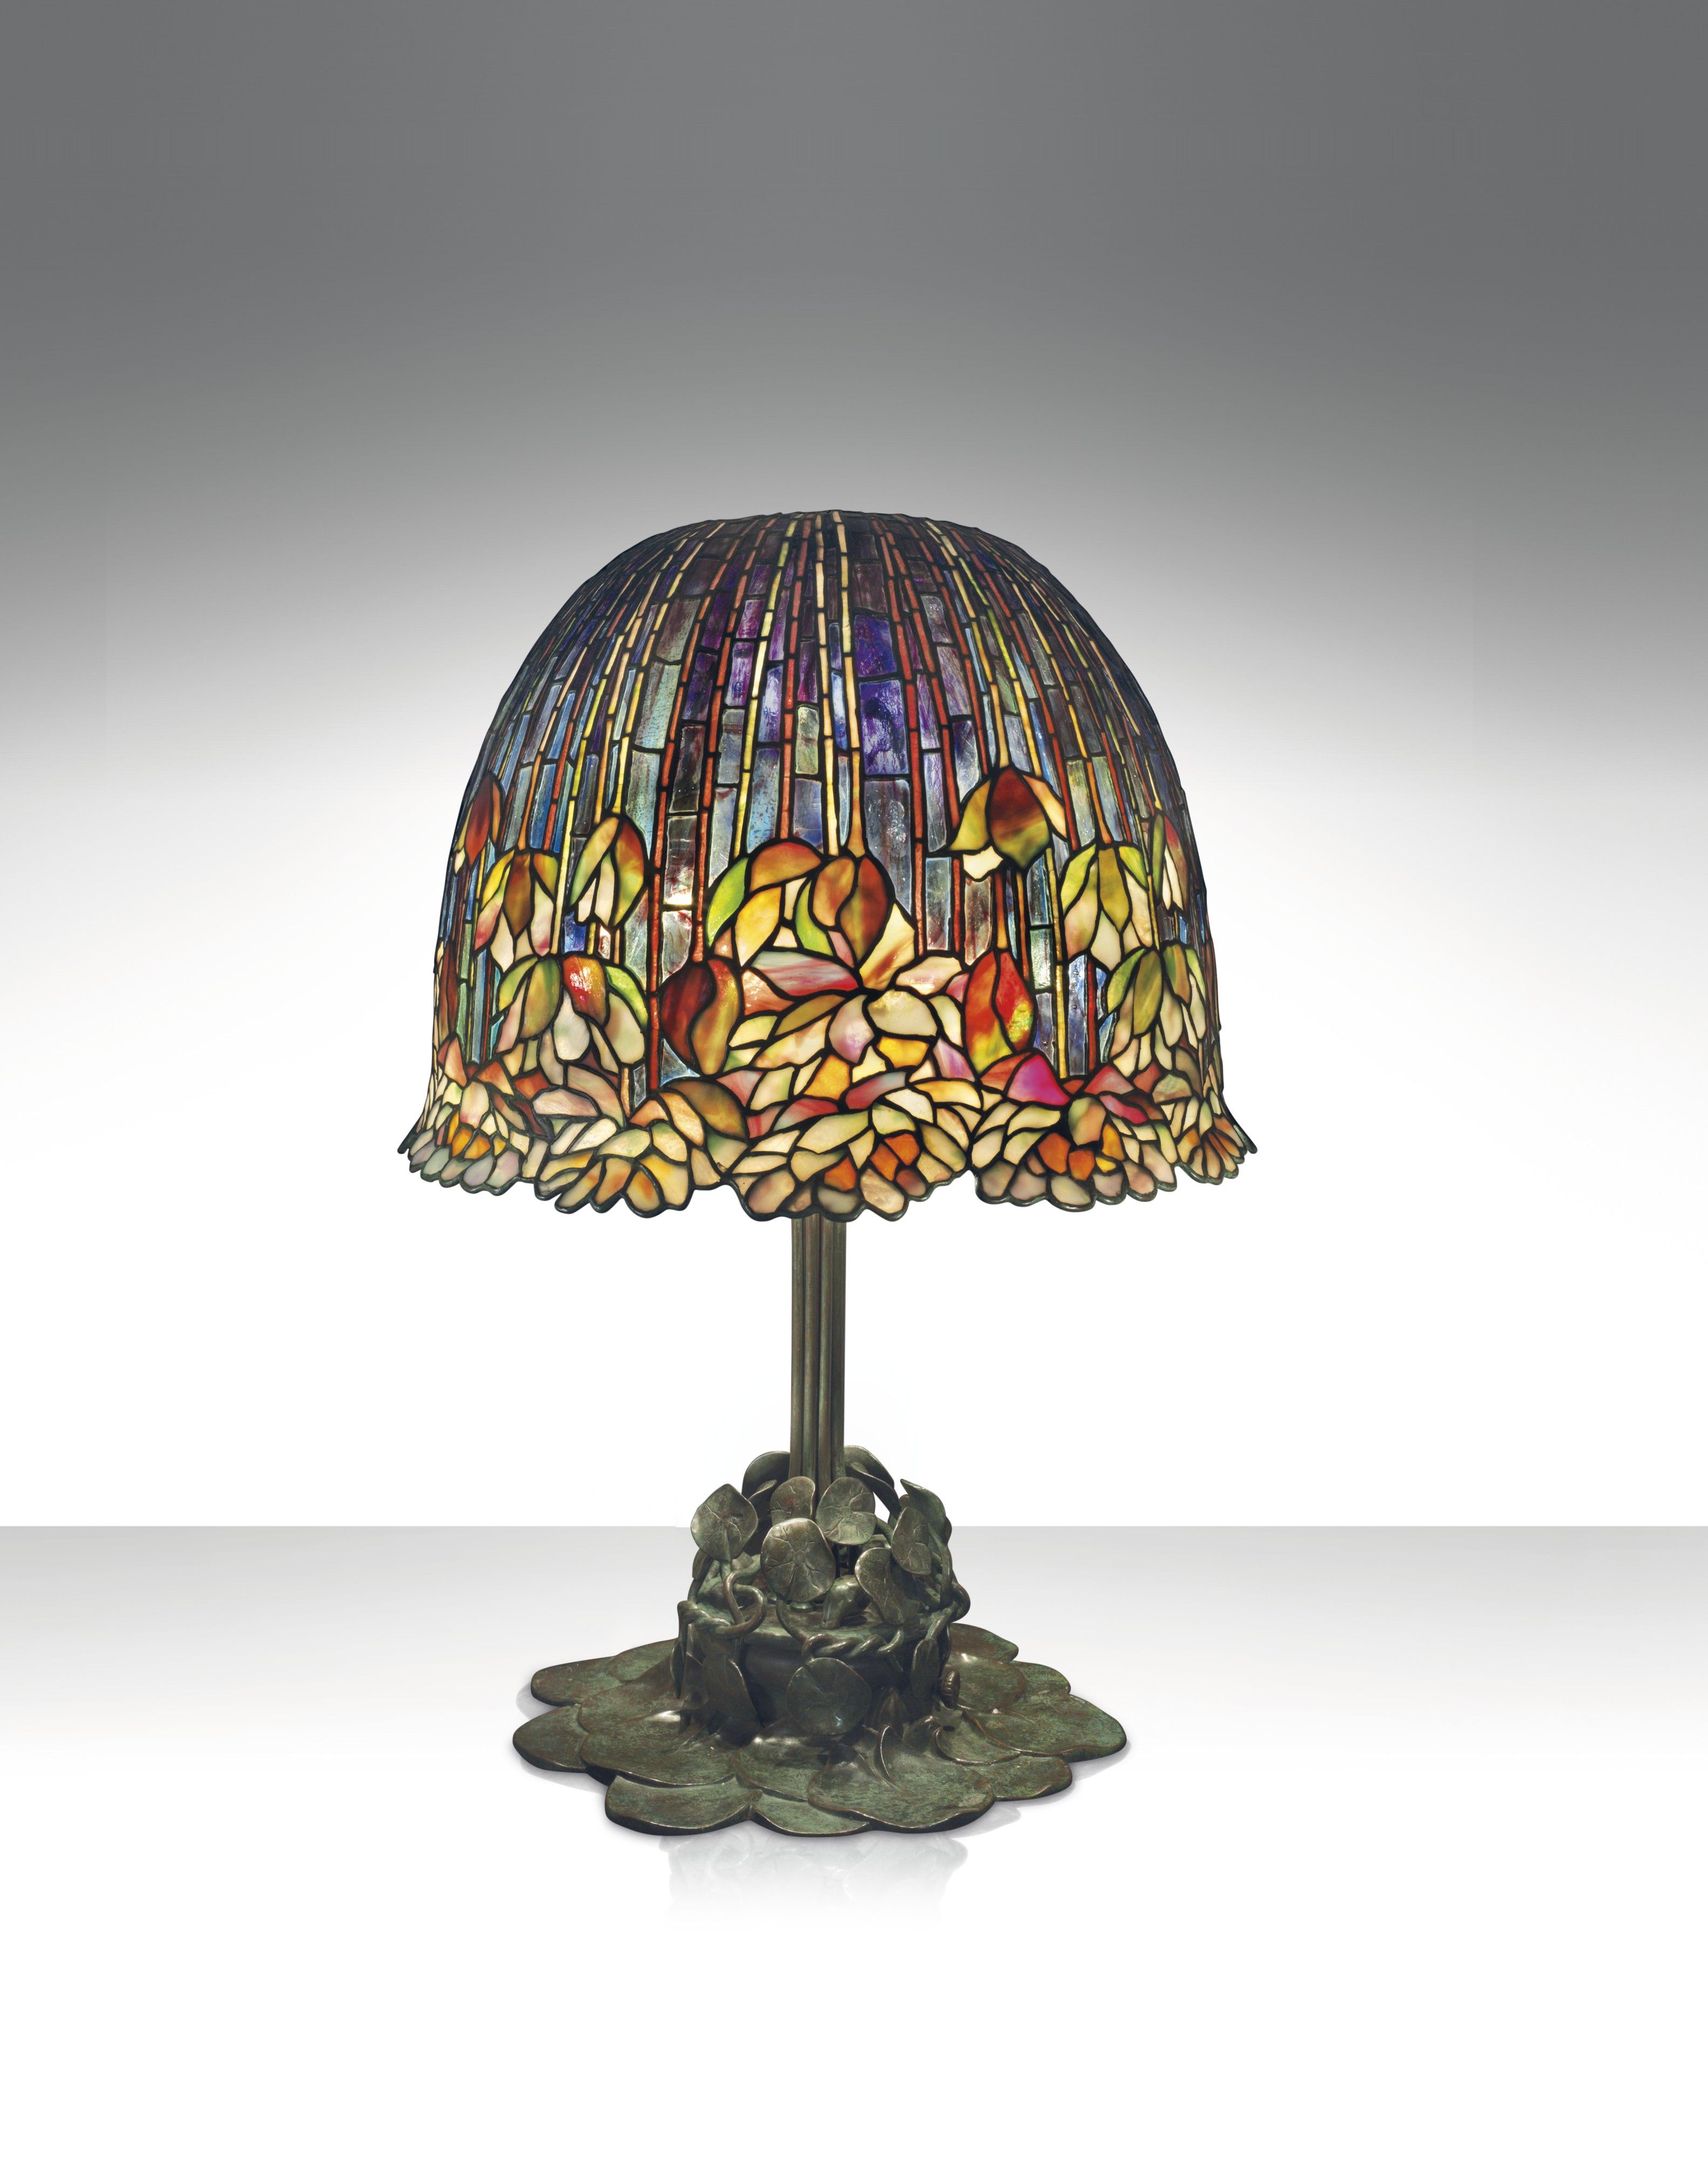 Diverso Reproducir agrio Christie's Just Sold A Tiffany Lamp For $3.37 Million - Pond Lily Tiffany  Lamp